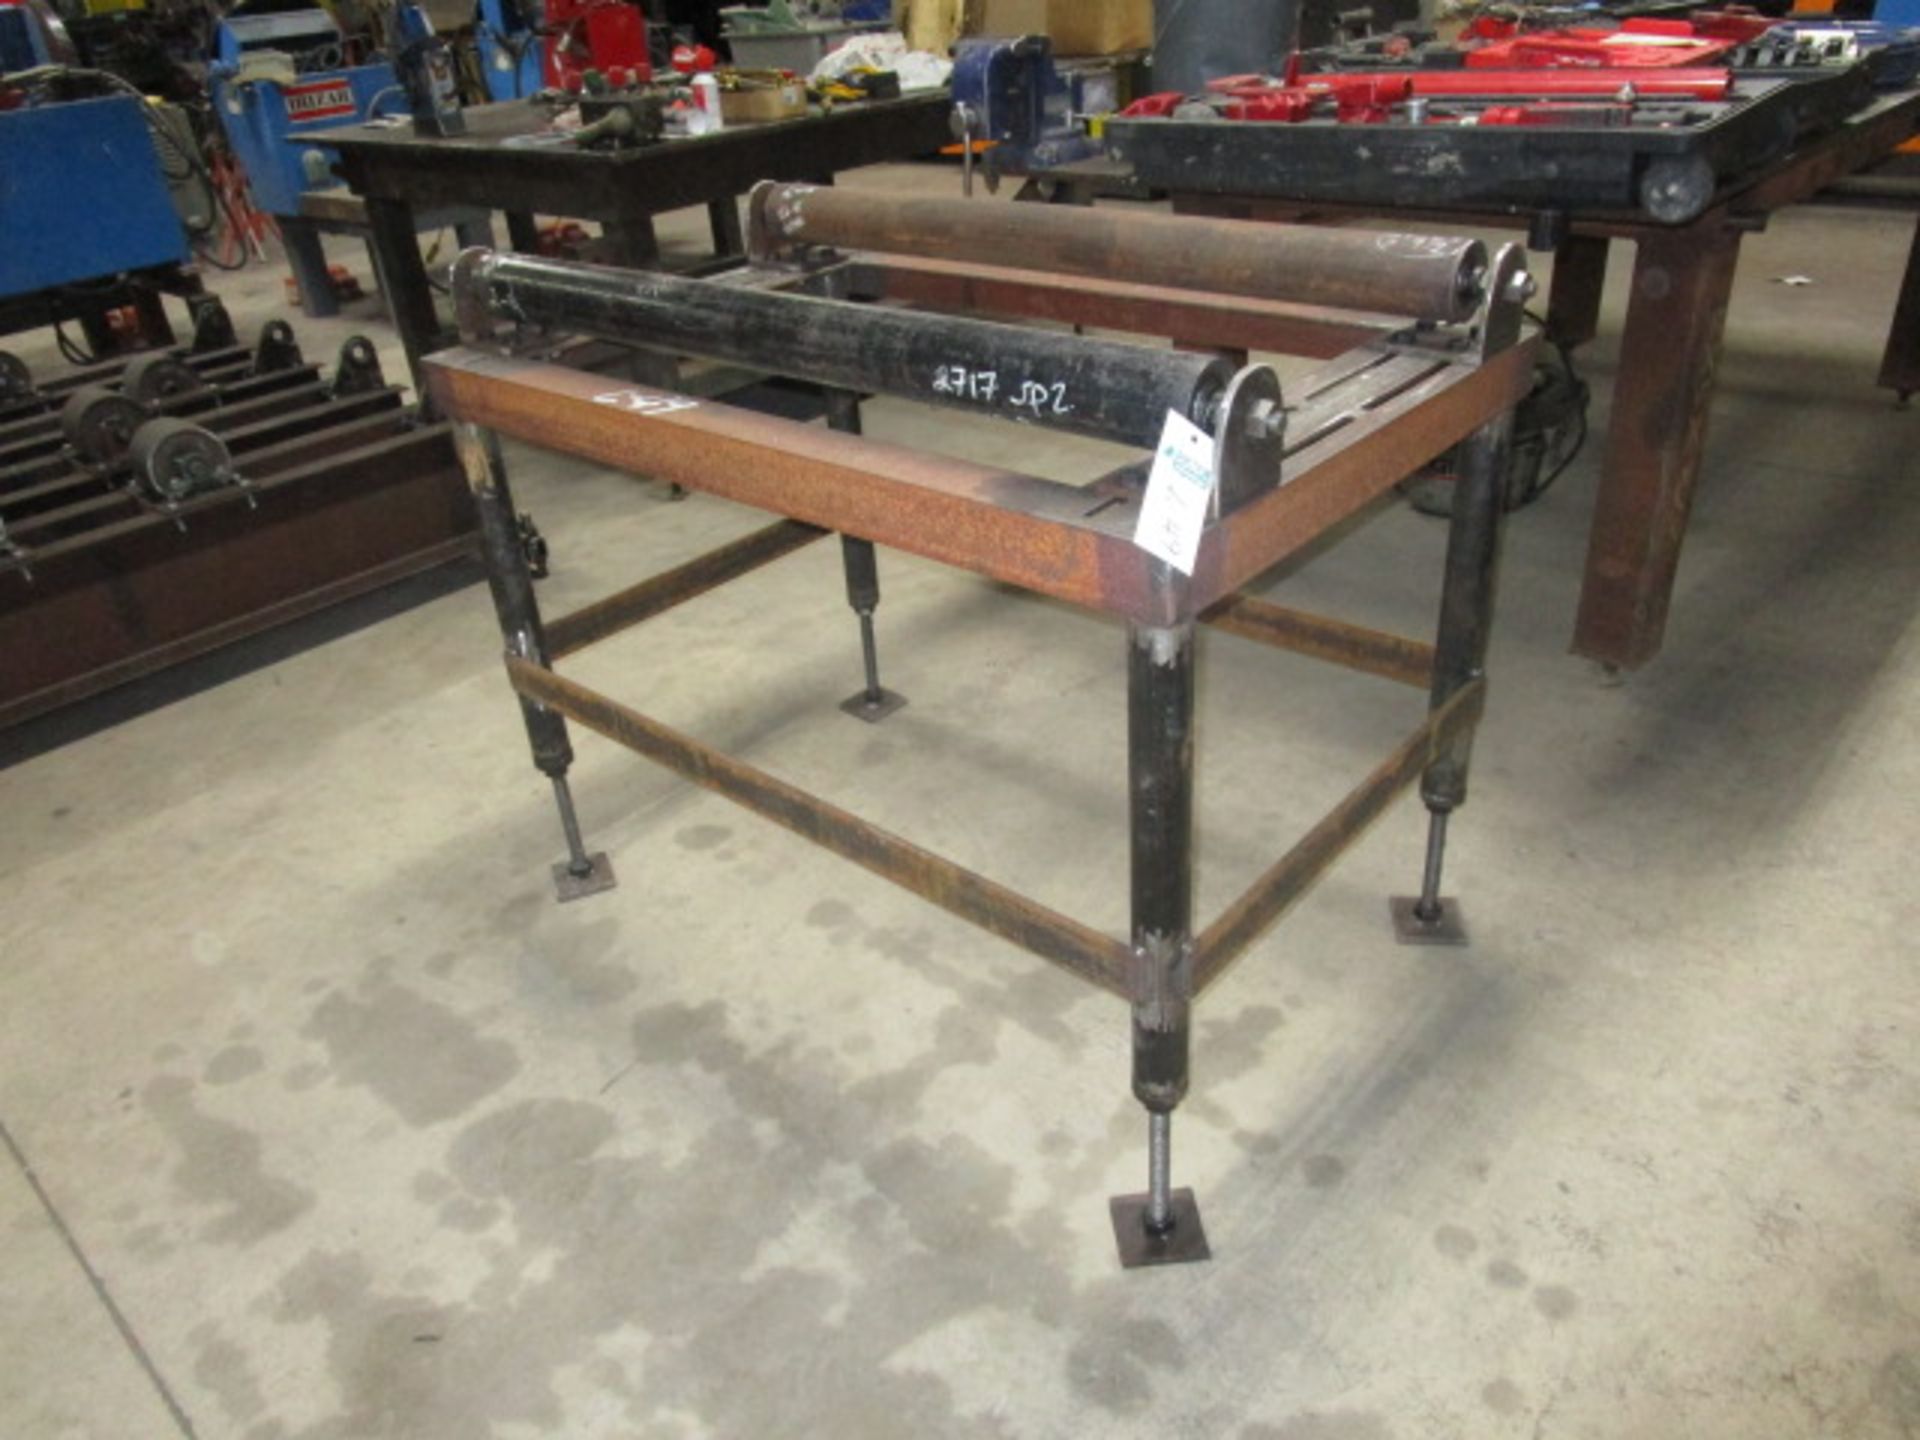 48"W X 31"L X 35"H Adjustrable Legs Double Rollers